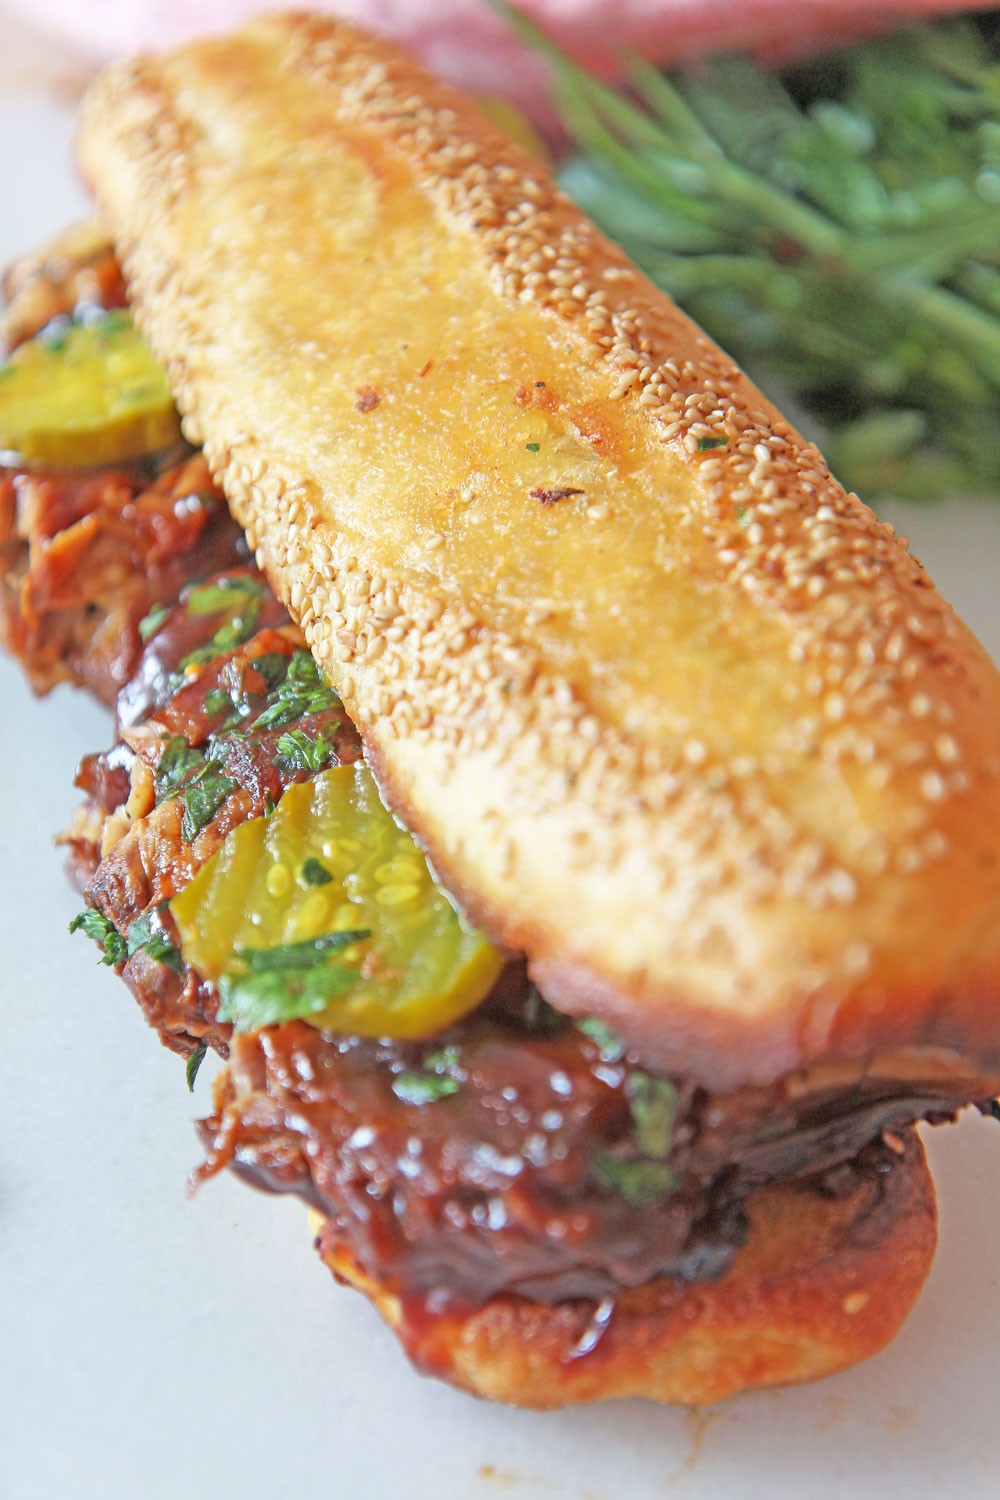 Huge BBQ Pork Sandwich with Garlic Bread Bun (slow cooker recipe). Grab pork ribs, BBQ sauce, pickles, and garlic bread. This is perfect party food, picnic, or summer time eats. Happy Cooking! www.ChopHappy.com #slowcookerecipes #sandwichrecipe